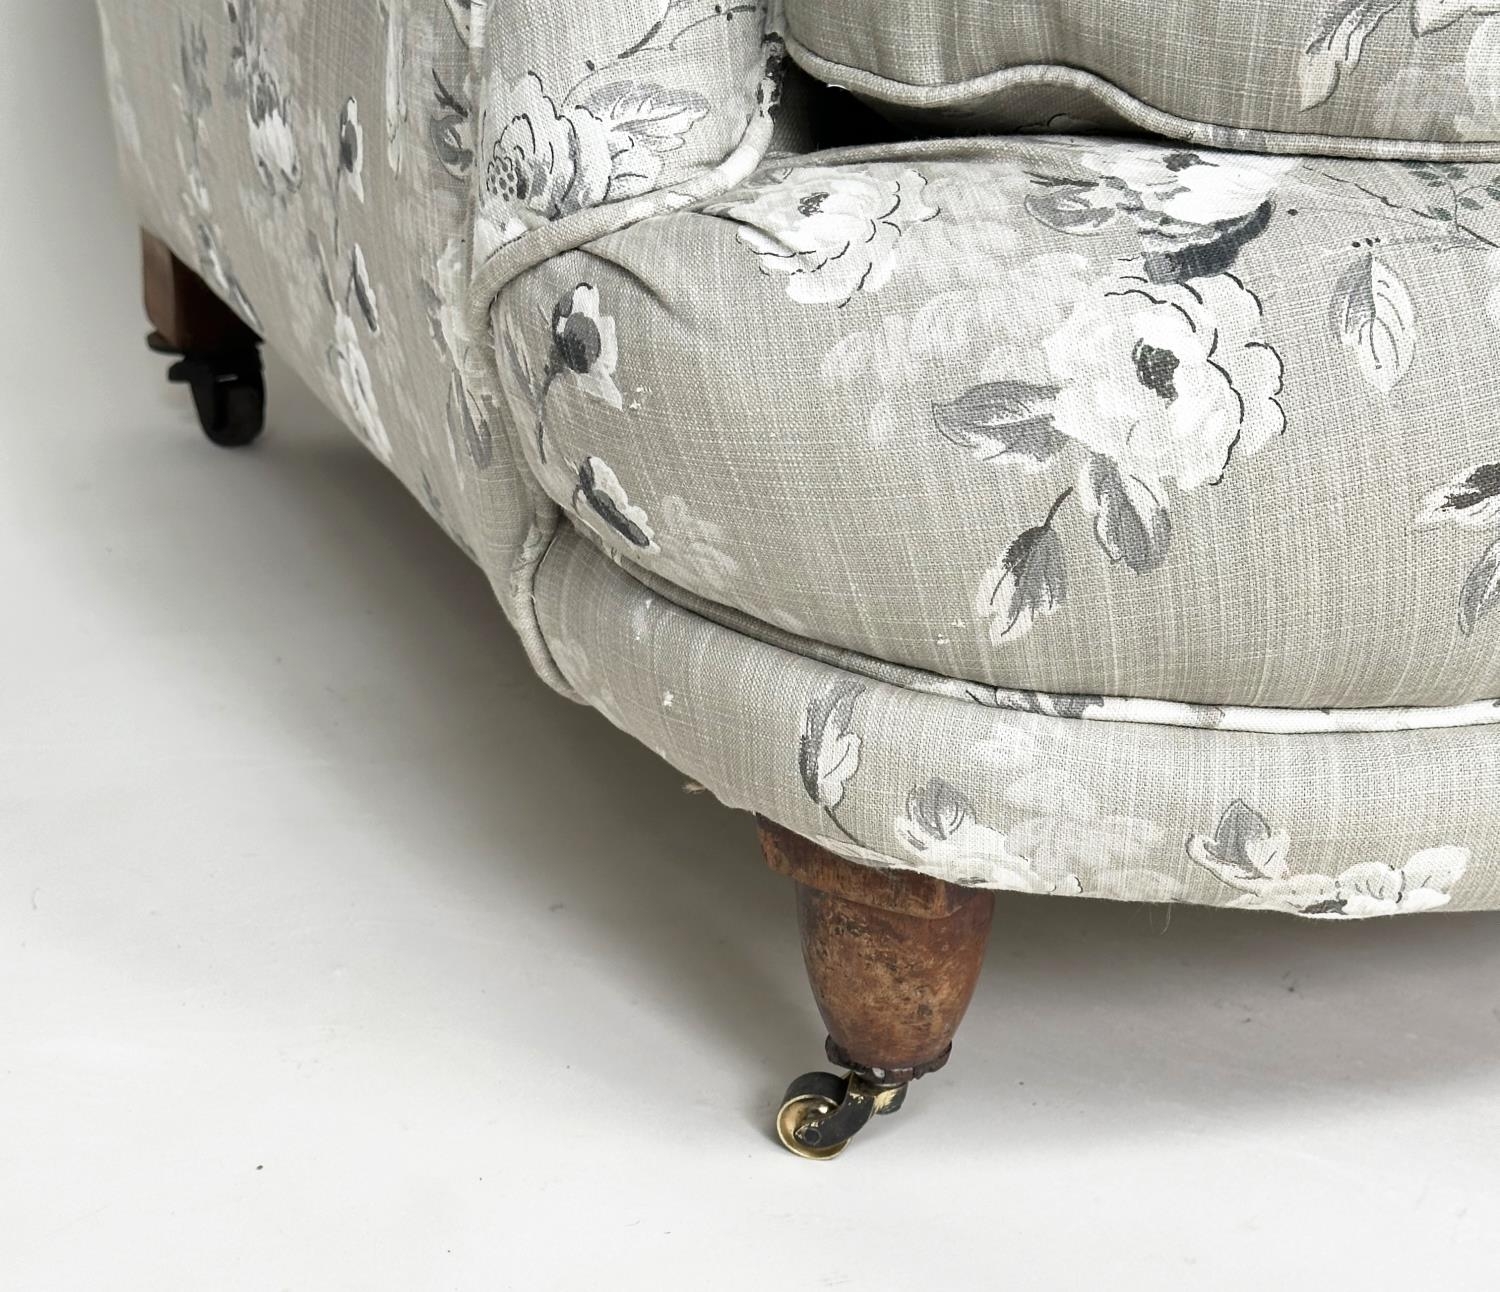 WILLIAM BIRCH ARMCHAIR, 19th century Howard type, newly upholstered in grey linen impressed numerals - Image 13 of 13